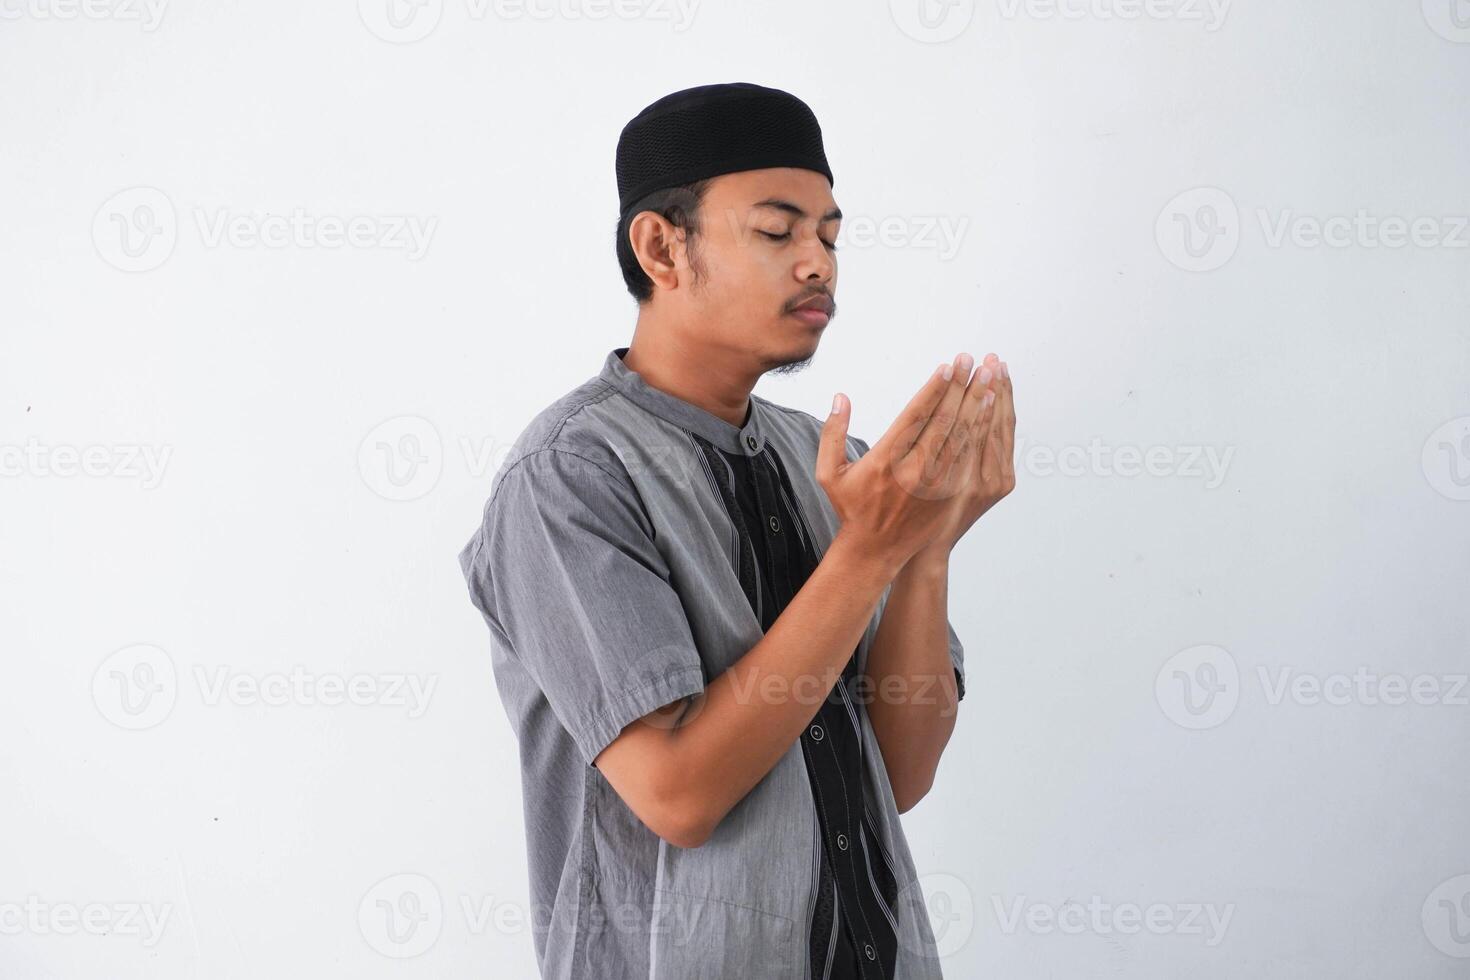 Religious young asian muslim man with close eyes praying, holding palms face up, whispering pray, isolated on white background. Religion islam, believing concept photo